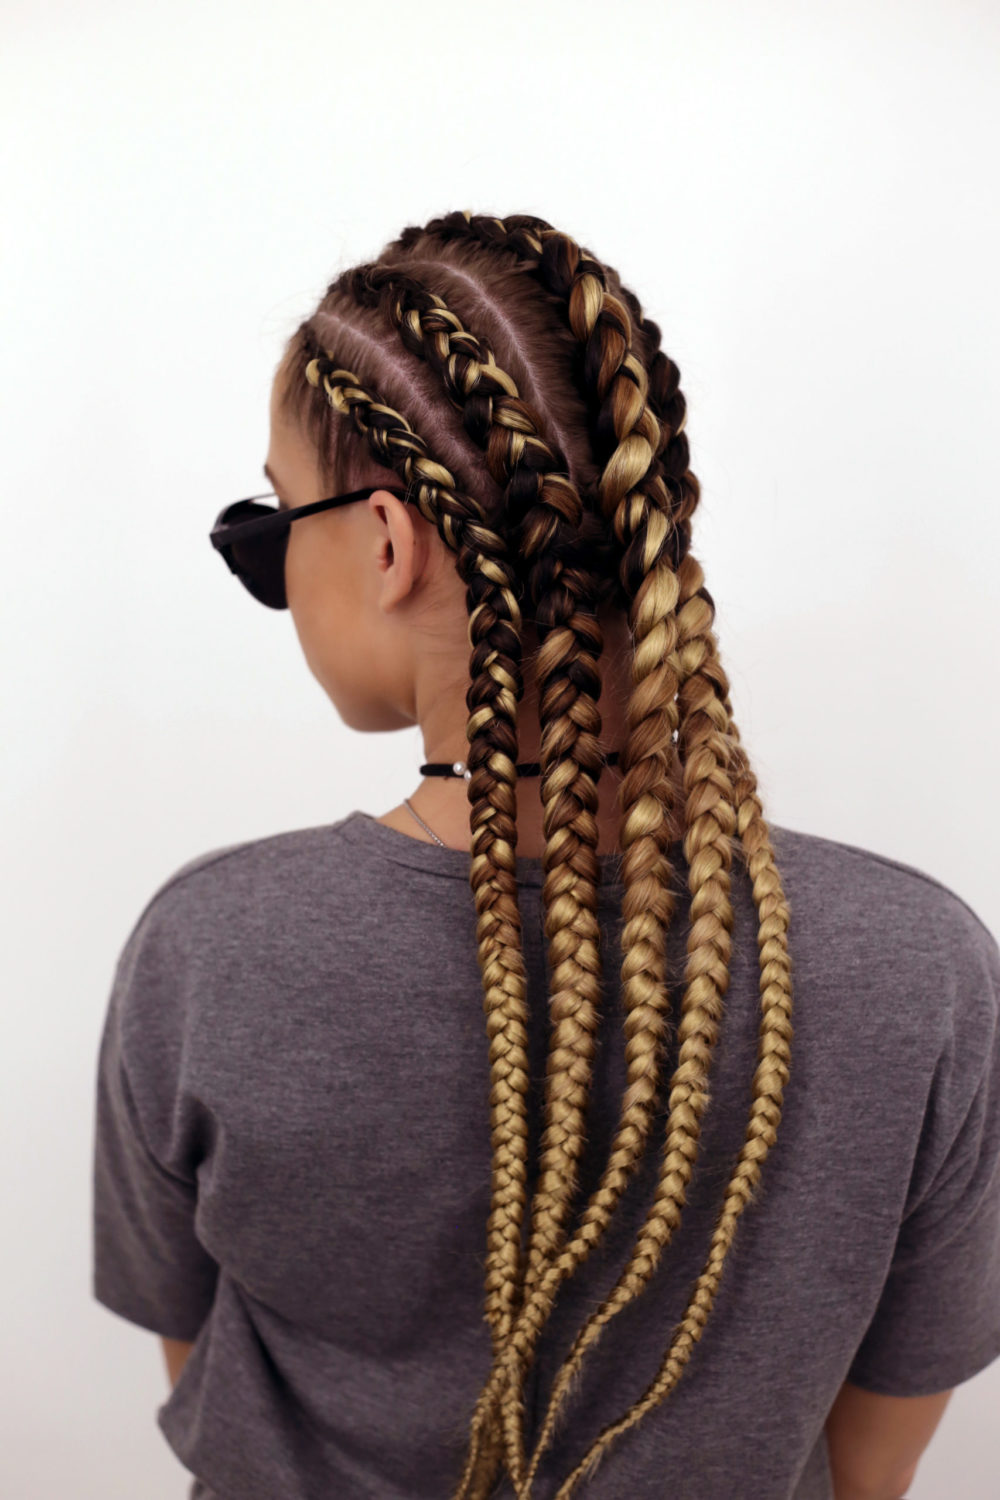 Jumbo Cornrows, a mixed race cute hairstyle for curly hair